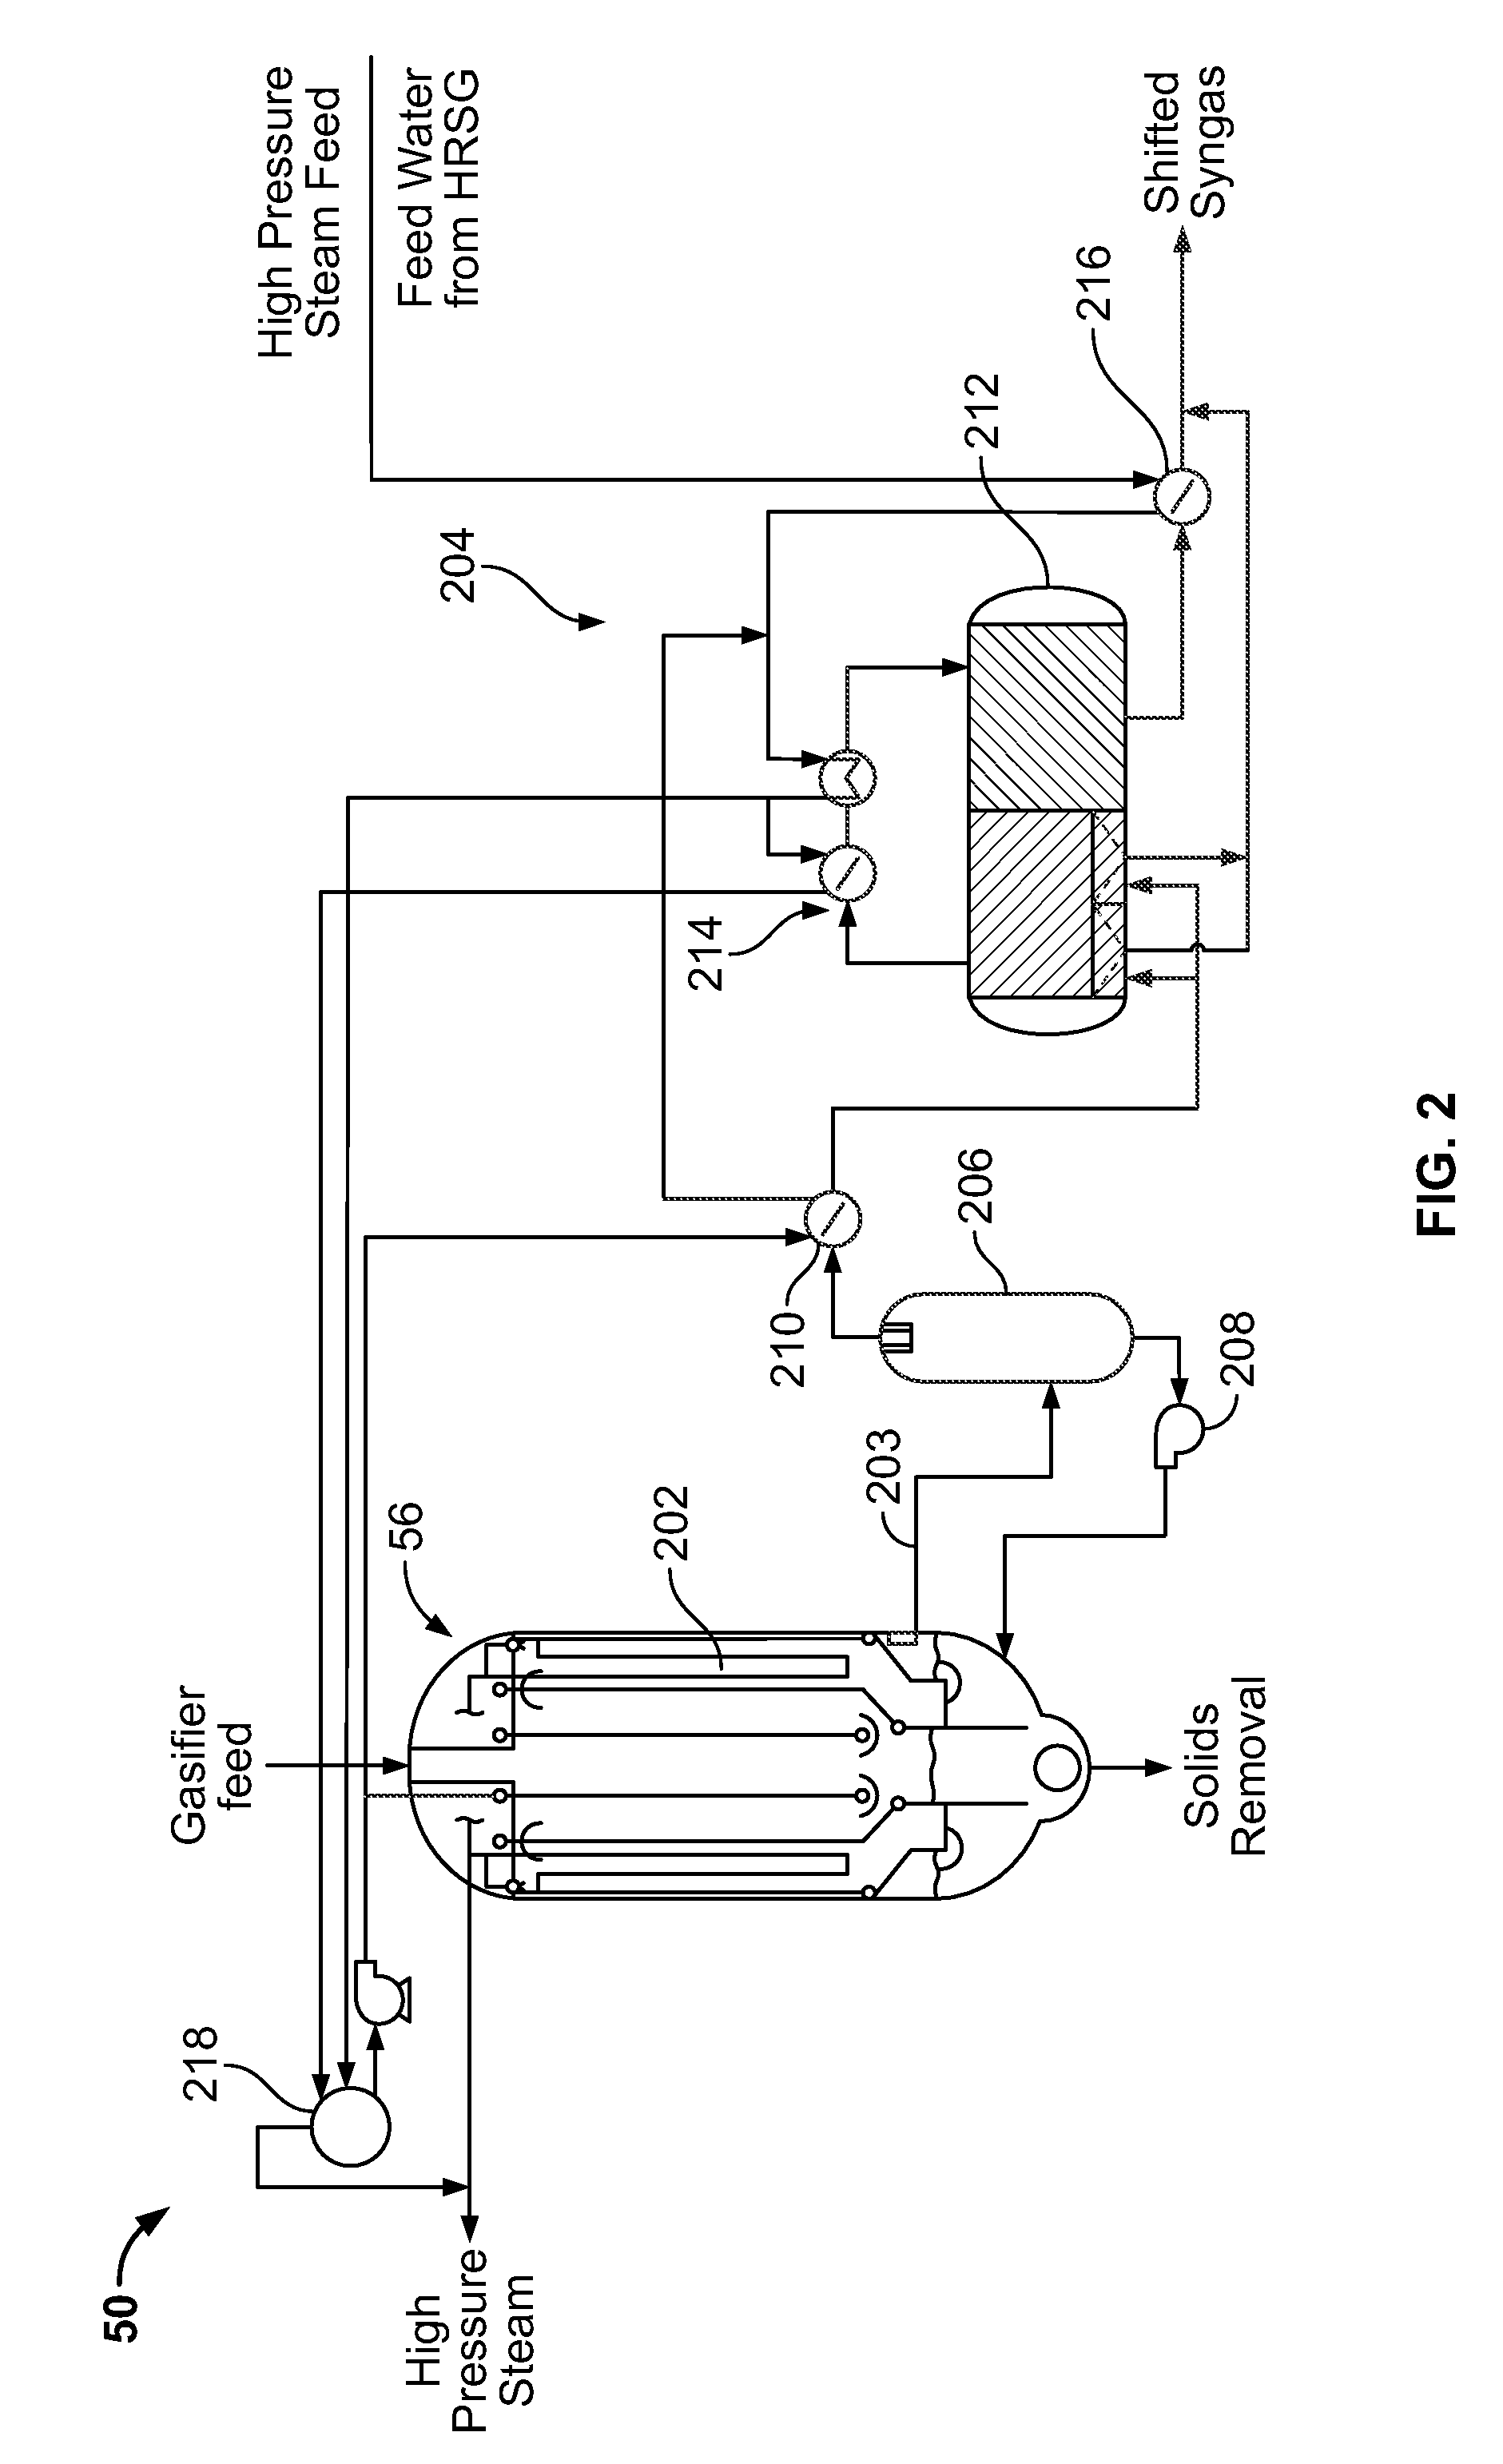 Methods and systems for integrated boiler feed water heating